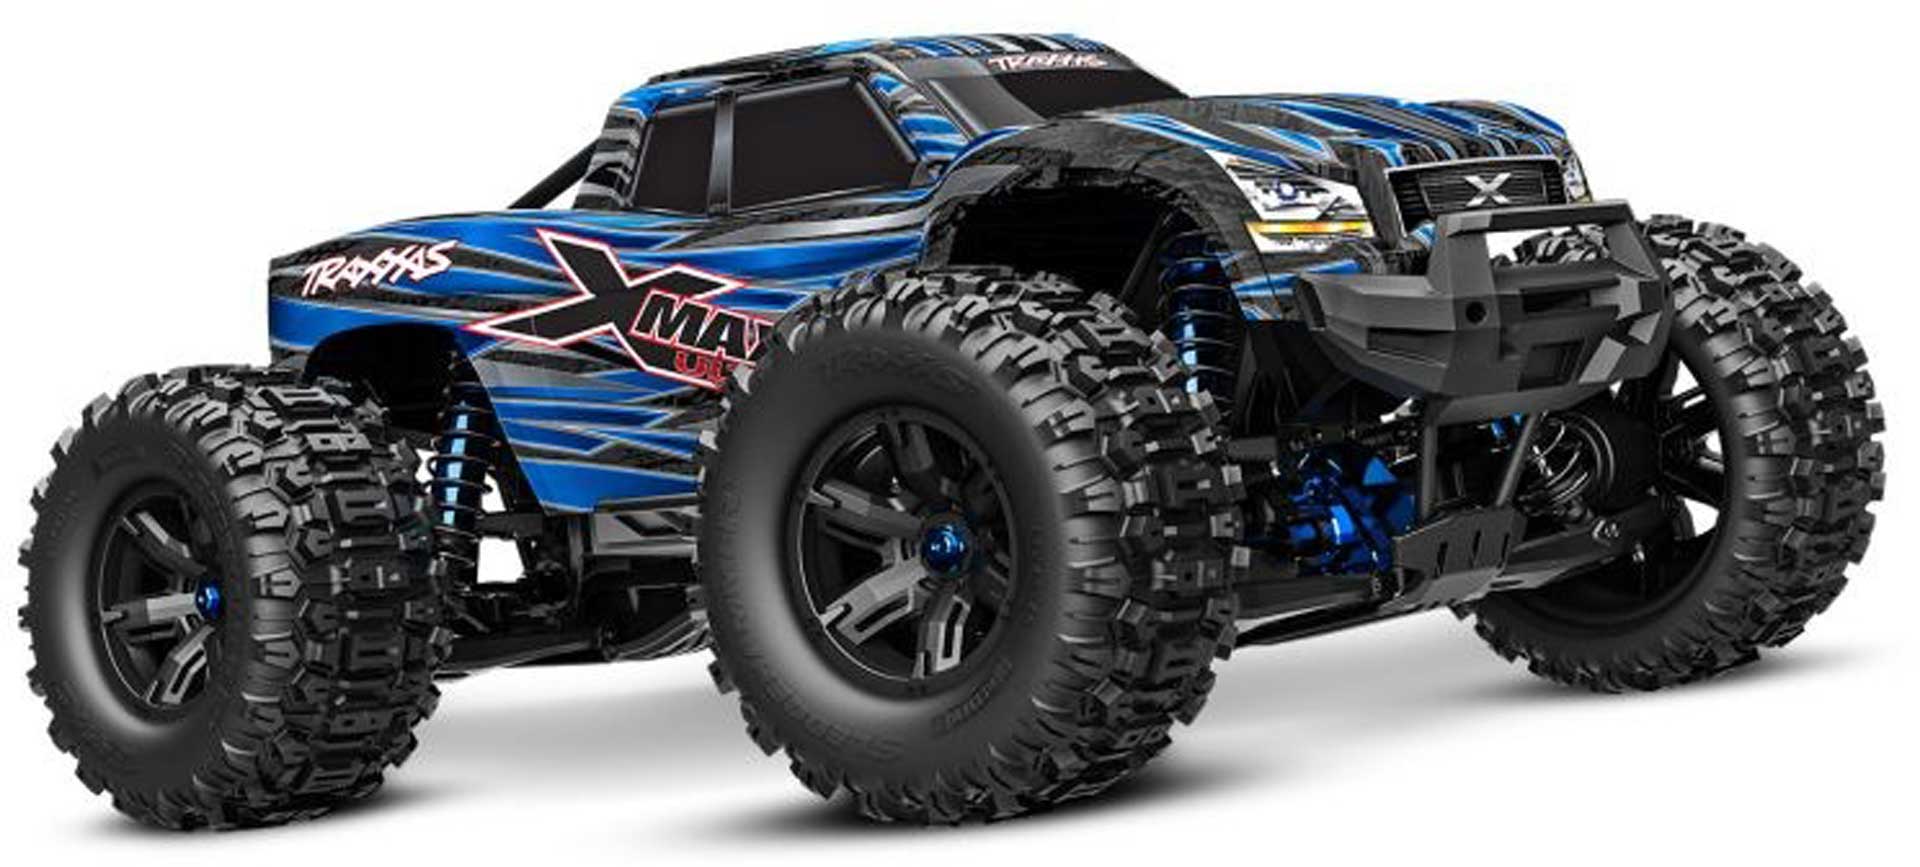 TRAXXAS X-MAXX ULTIMATE 4X4 VXL BLUE 1/7 MONSTER-TRUCK RTR BRUSHLESS WITHOUT BATTERY AND CHARGER (LIMITED VERSION)